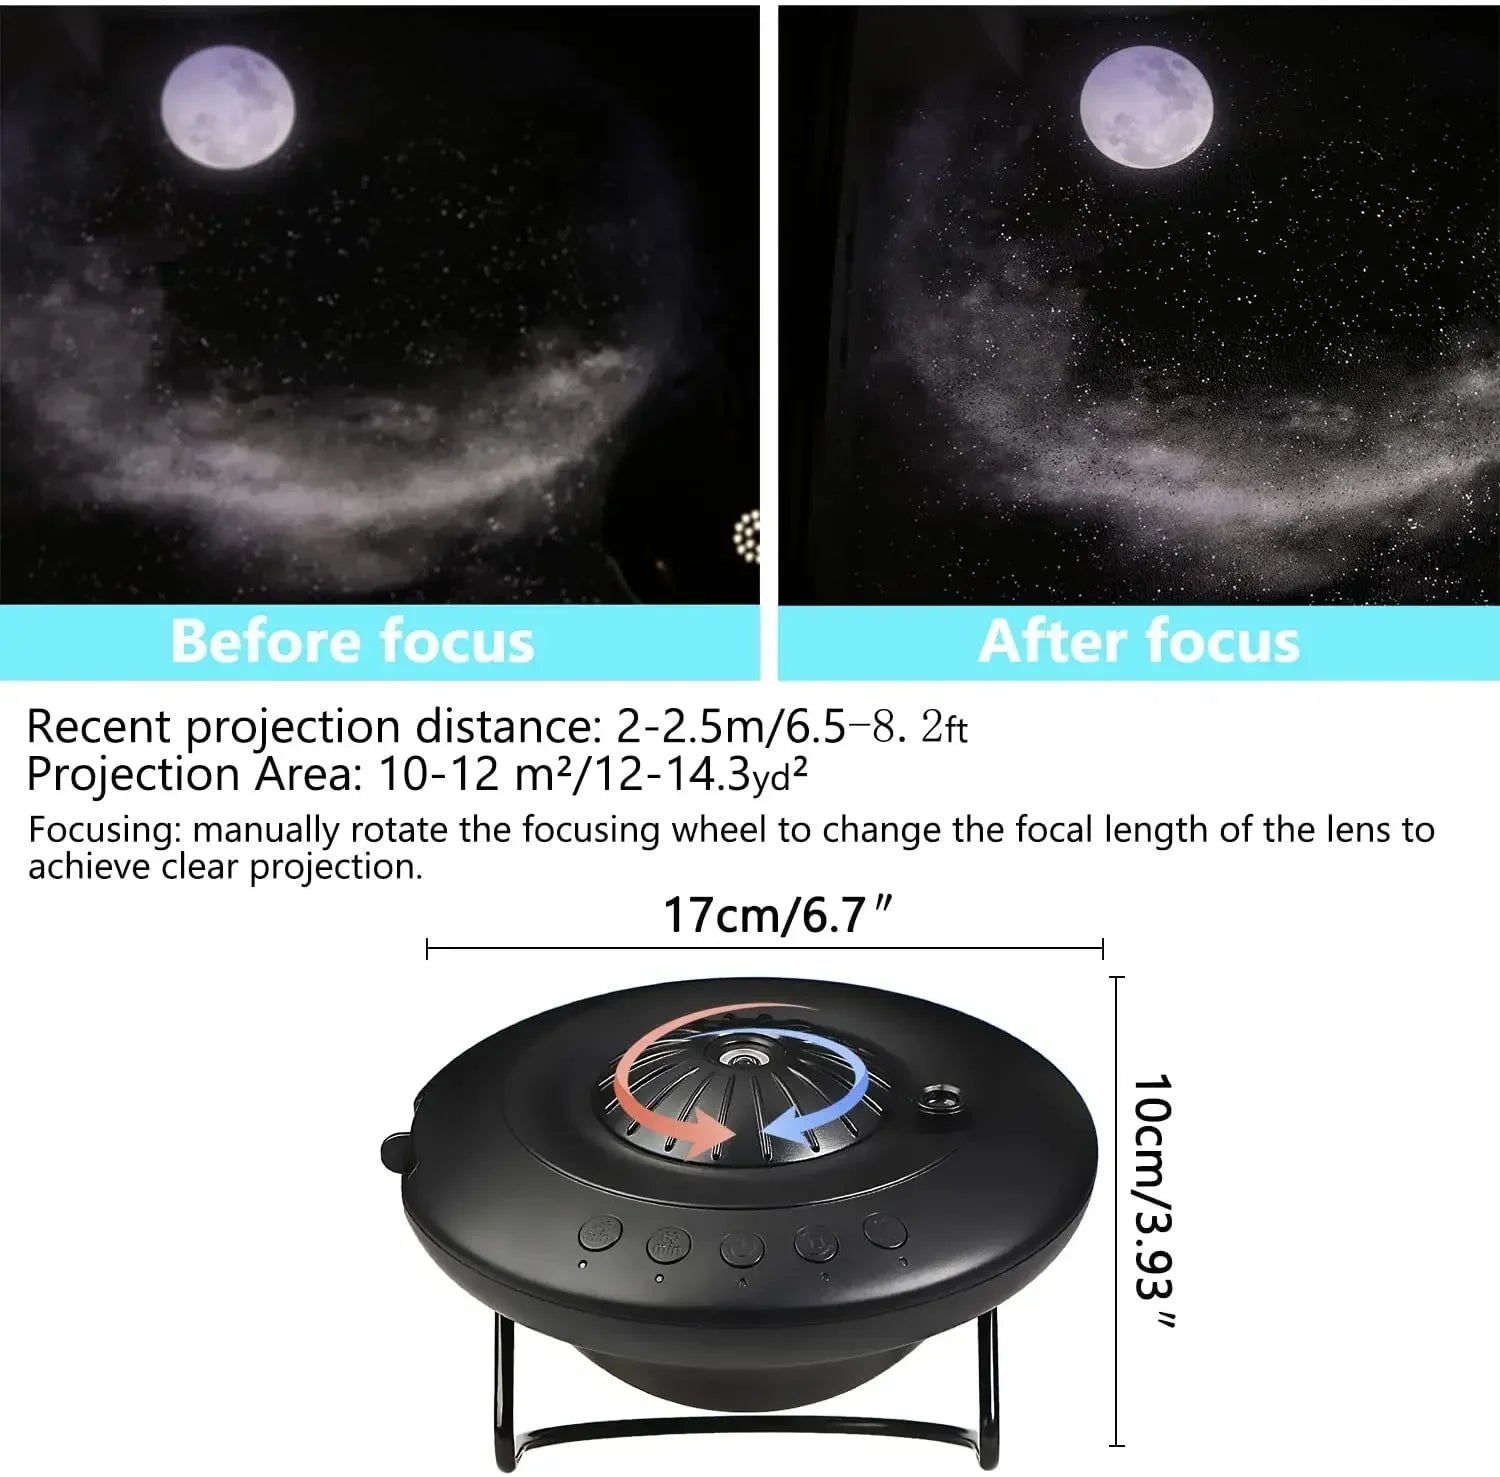 NEW UFO LED Star Projector Night Light – 8 in 1 Planetarium Projection Galaxy Starry Sky Projector Lamp for Kids, Gift, and Room Decor